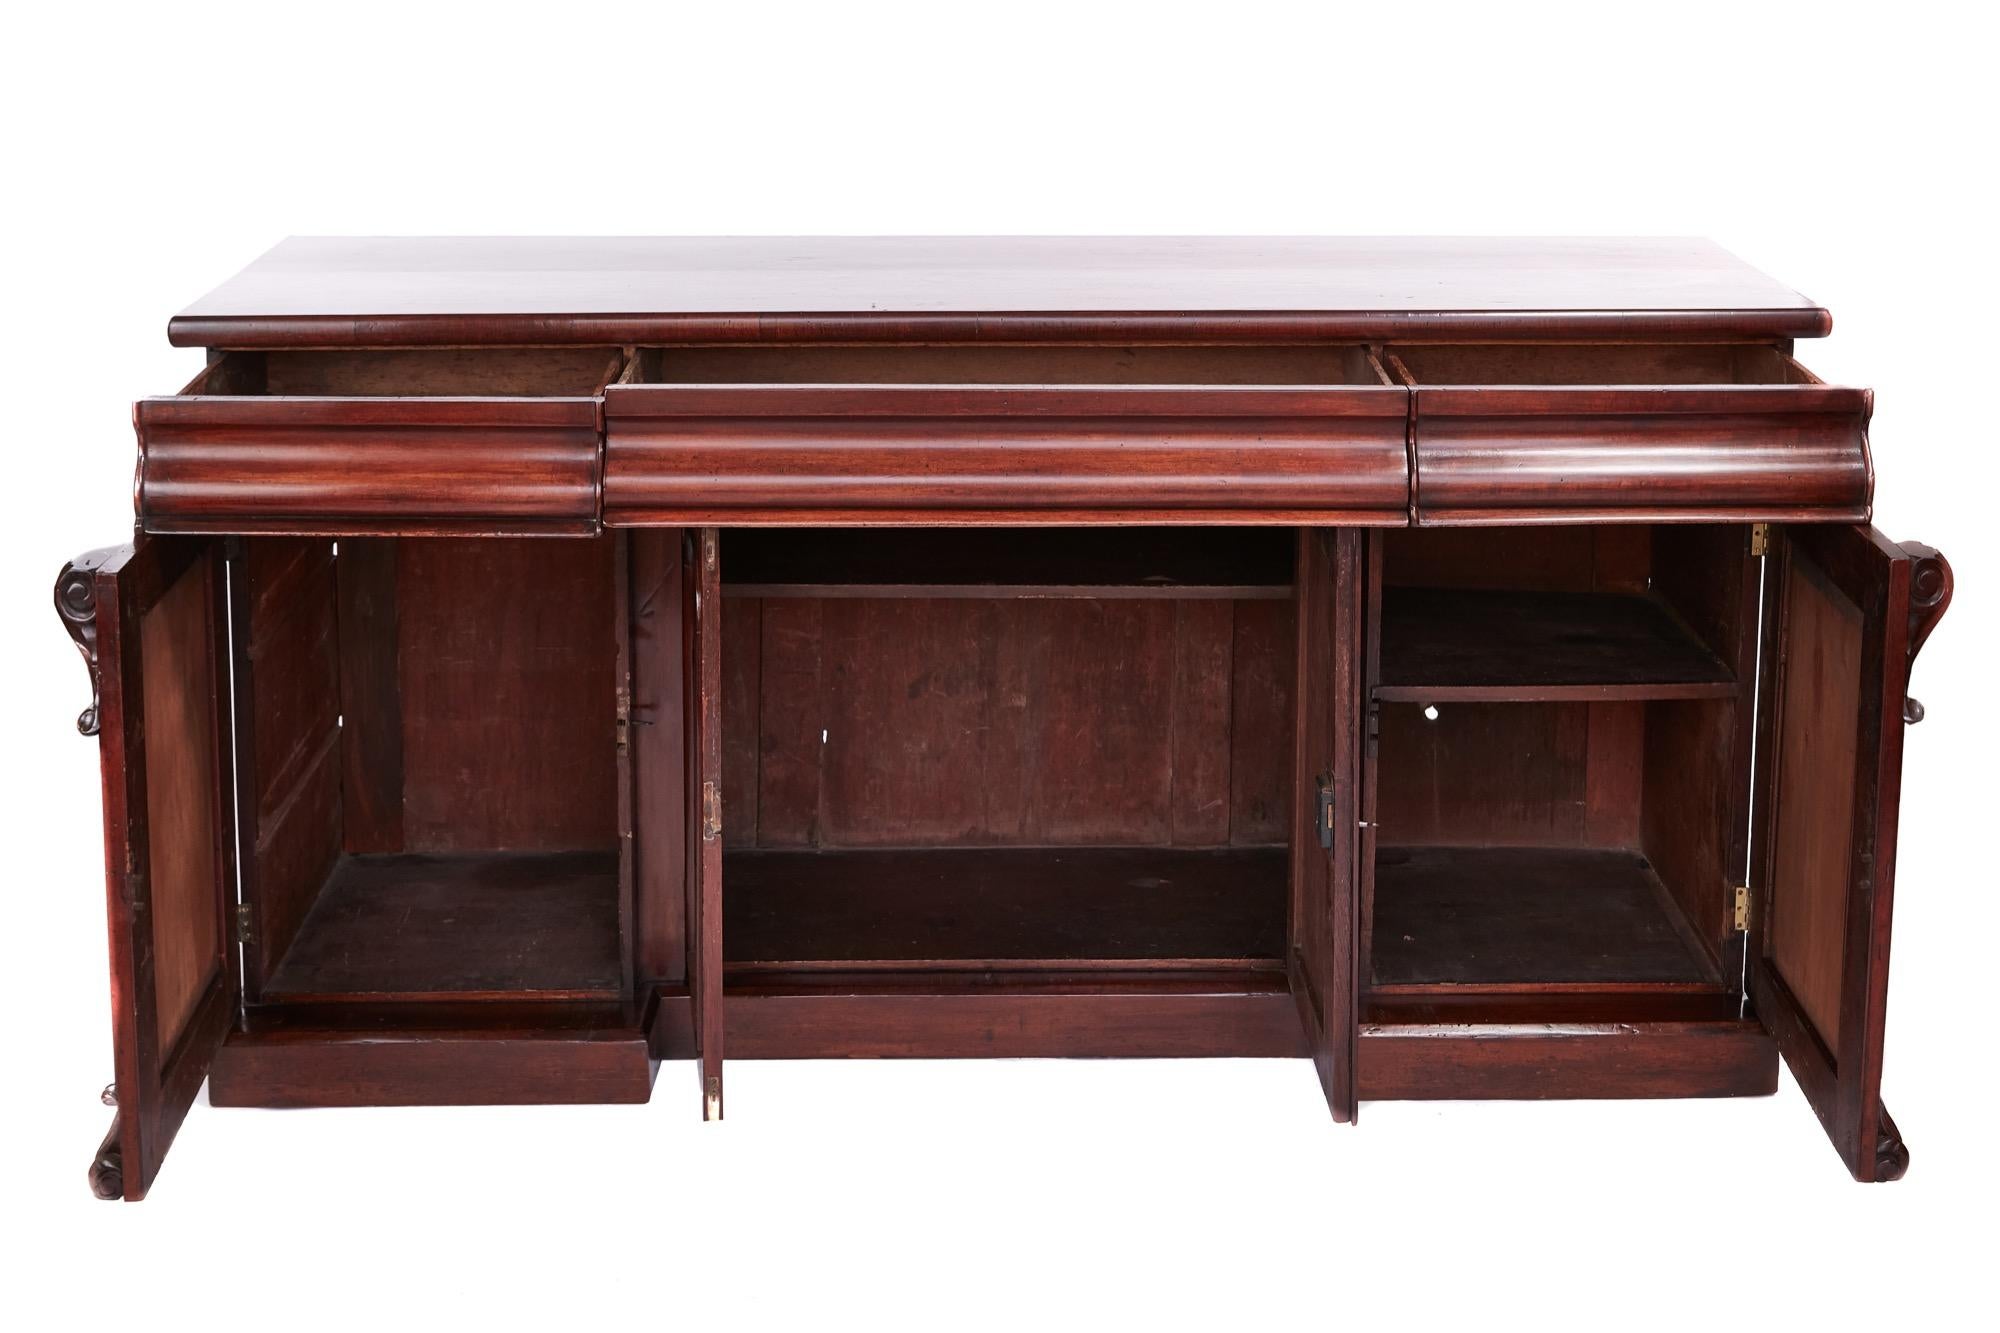 Antique Victorian four-door mahogany sideboard having a quality mahogany top with three frieze drawers and four figured mahogany paneled doors, the outer doors with carvings to the top and bottom which open to reveal a fitted interior, the sideboard